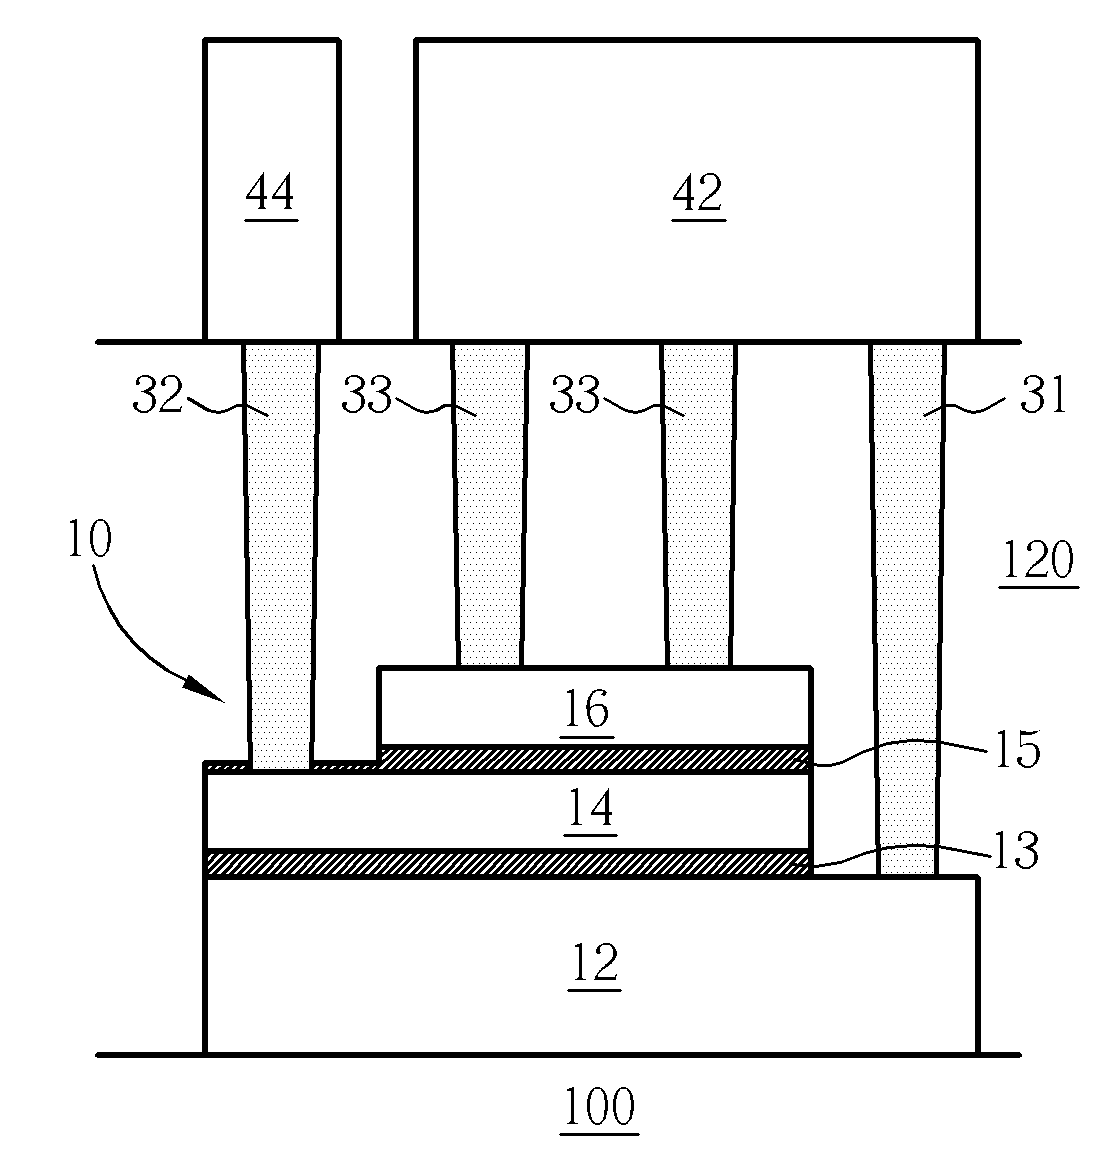 Poly-Insulator-Poly Capacitor and Fabrication Method for Making the Same